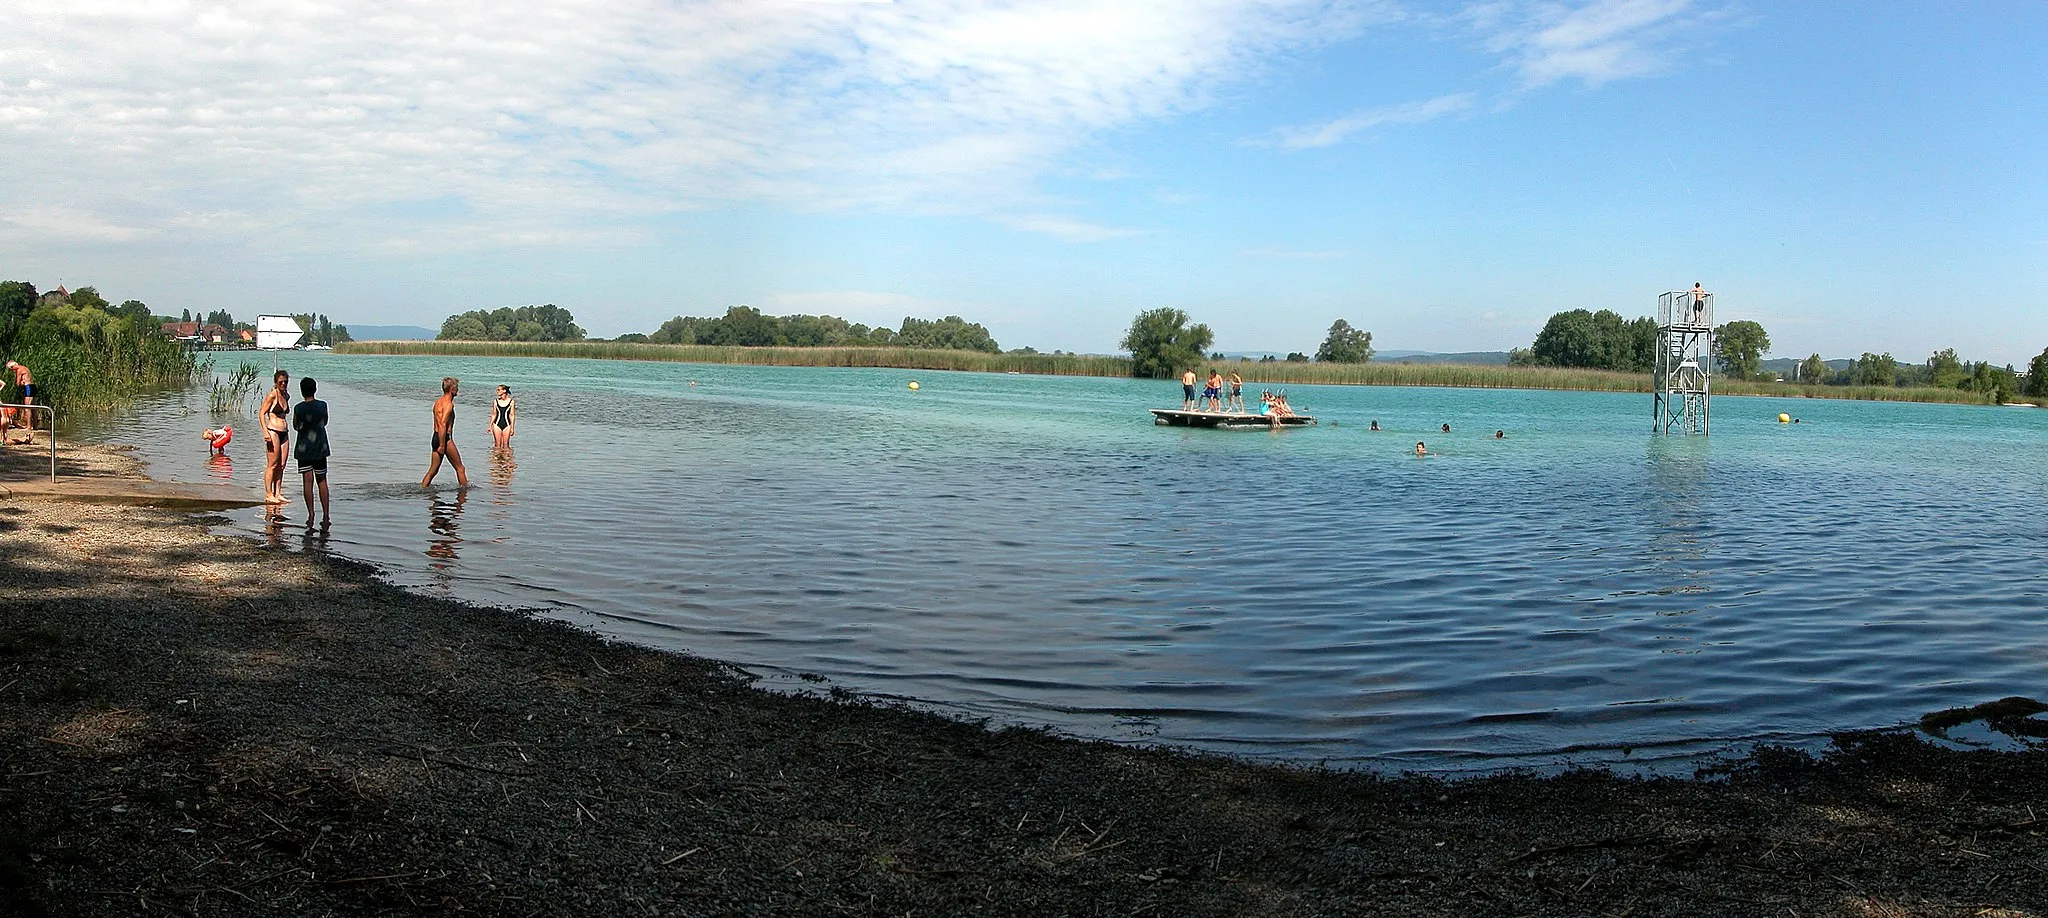 Photo showing: A lido on the Rhine between Lake Bodensee and Lake Untersee near Gottlieben, Germany.